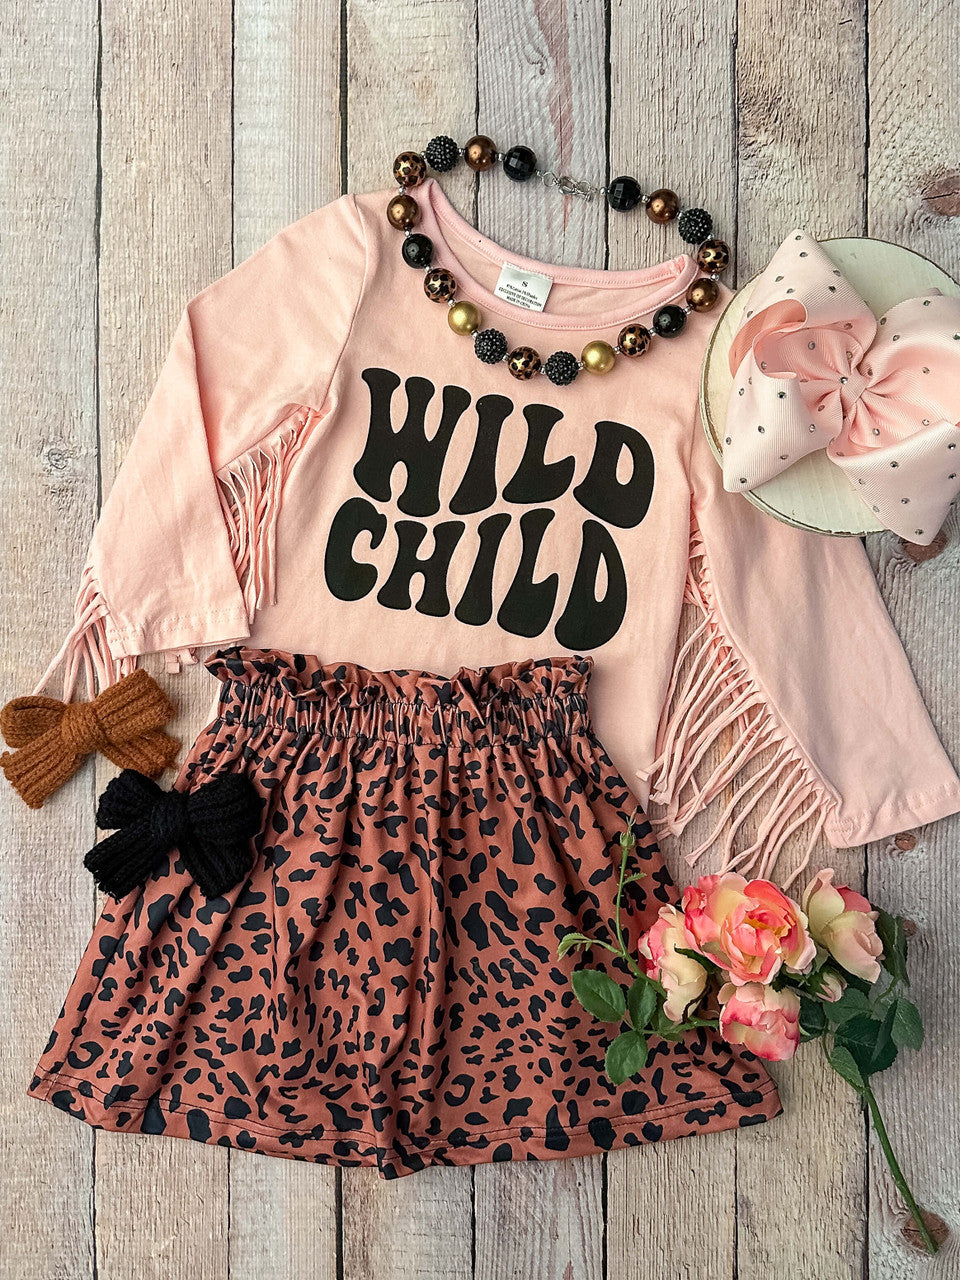 Pink long sleeve fringe top with Wild Child design with animal print skirt